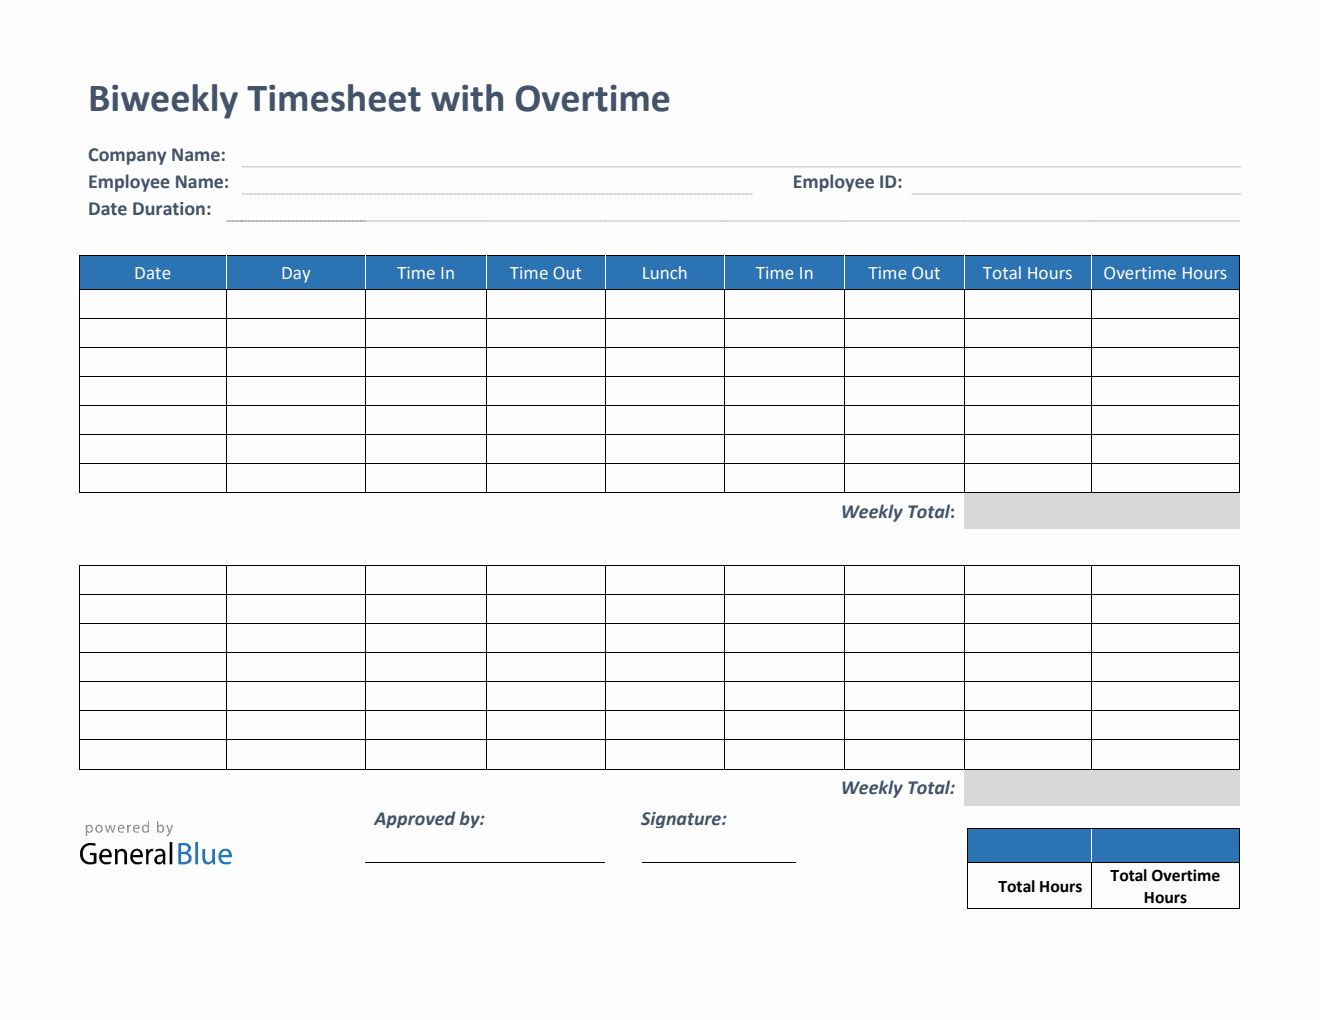 Biweekly Timesheet With Overtime Calculation in Word